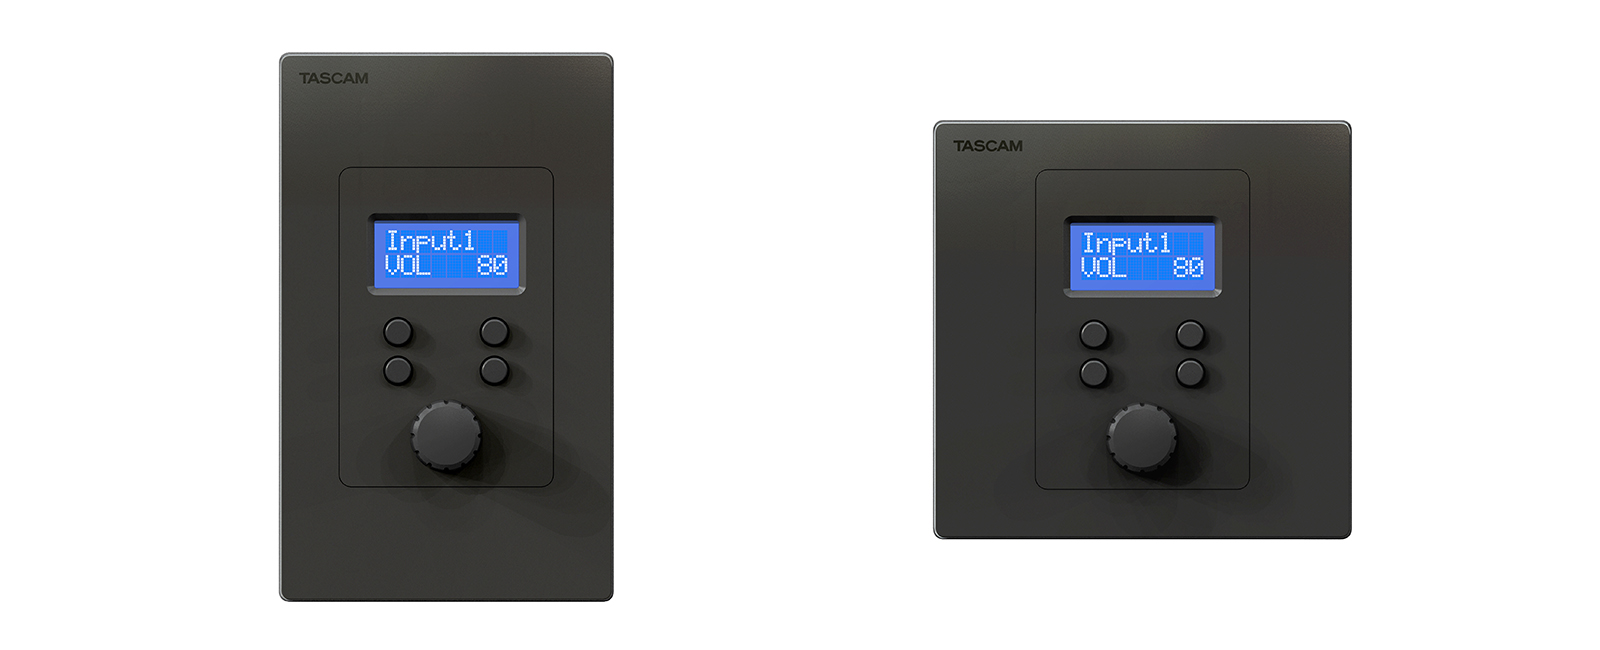 TASCAM Announces RC-W100 Wall Mount Controllers for the MX-8A Matrix Mixer